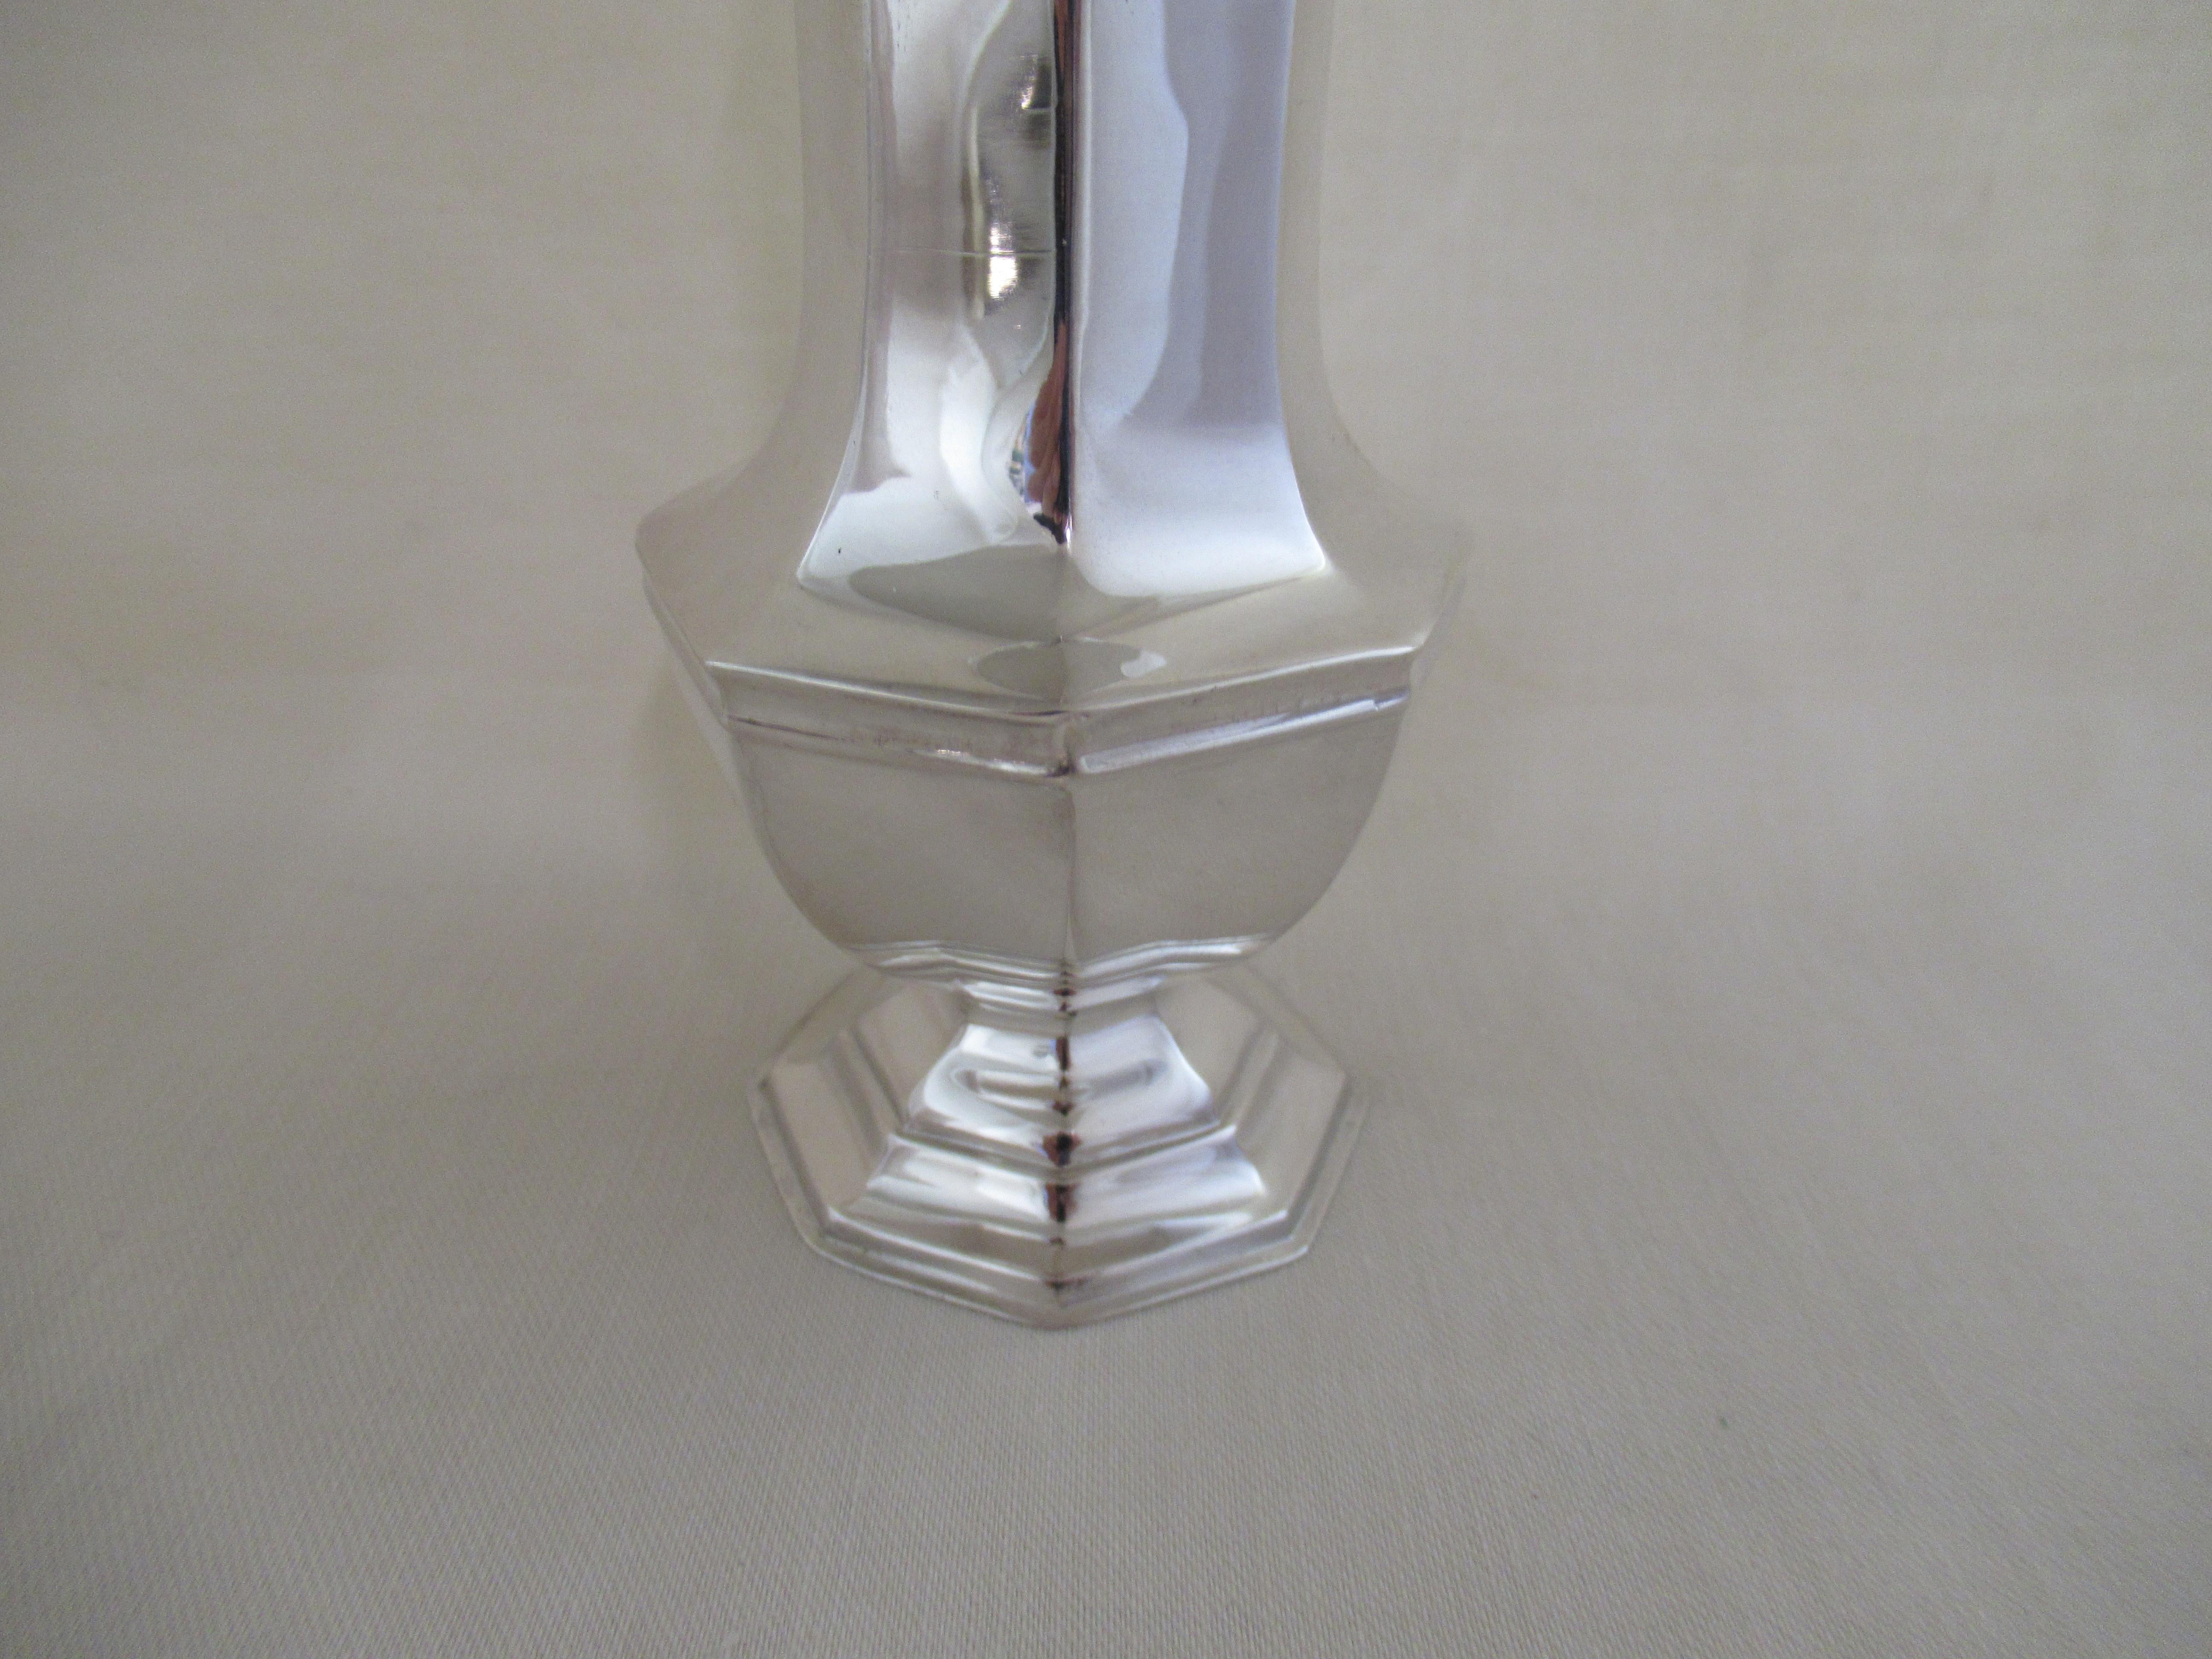 Hand-Crafted Sterling Silver Octagonal Baluster Sugar Caster Hallmarked:- London, 1903 For Sale